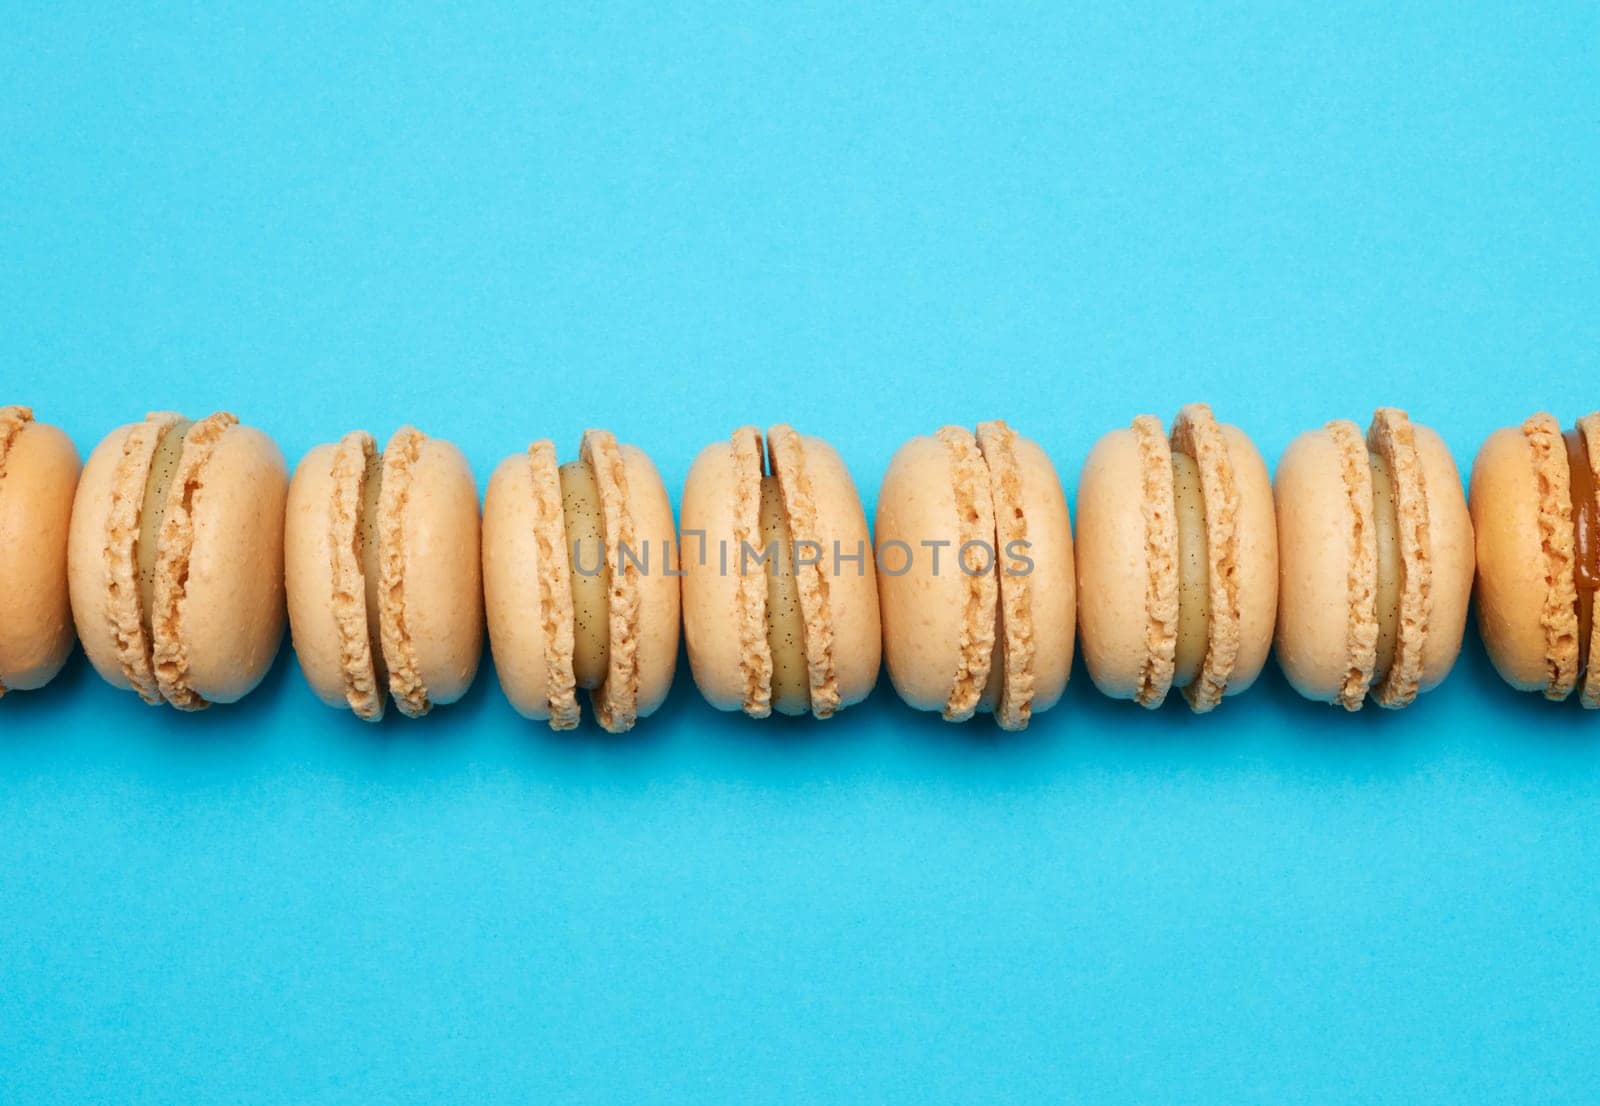 Chocolate macarons on a blue background, dessert. Top view